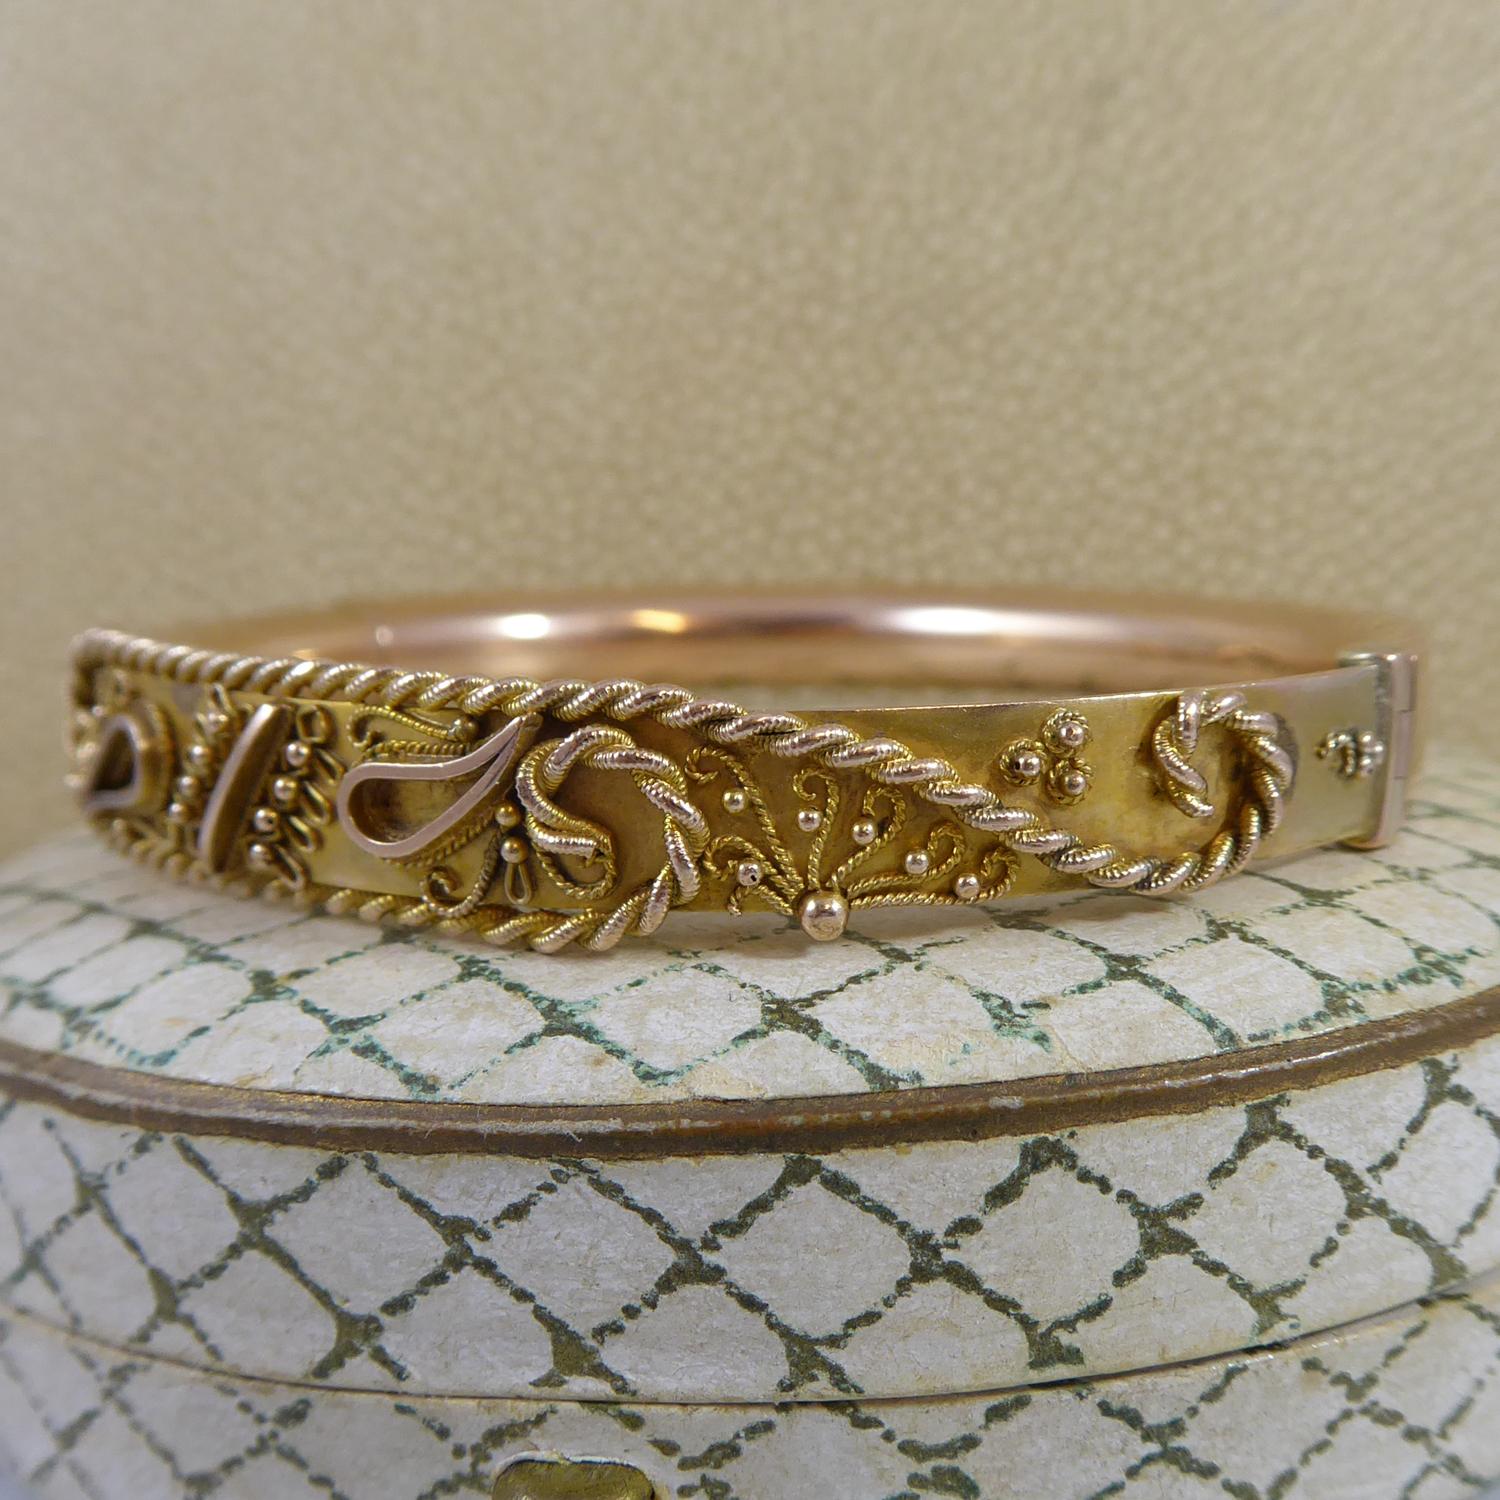 An antique bangle crafted from rose gold at the turn of the 20th century.  The bangle is a D shaped cross section hollow approx. 0.25